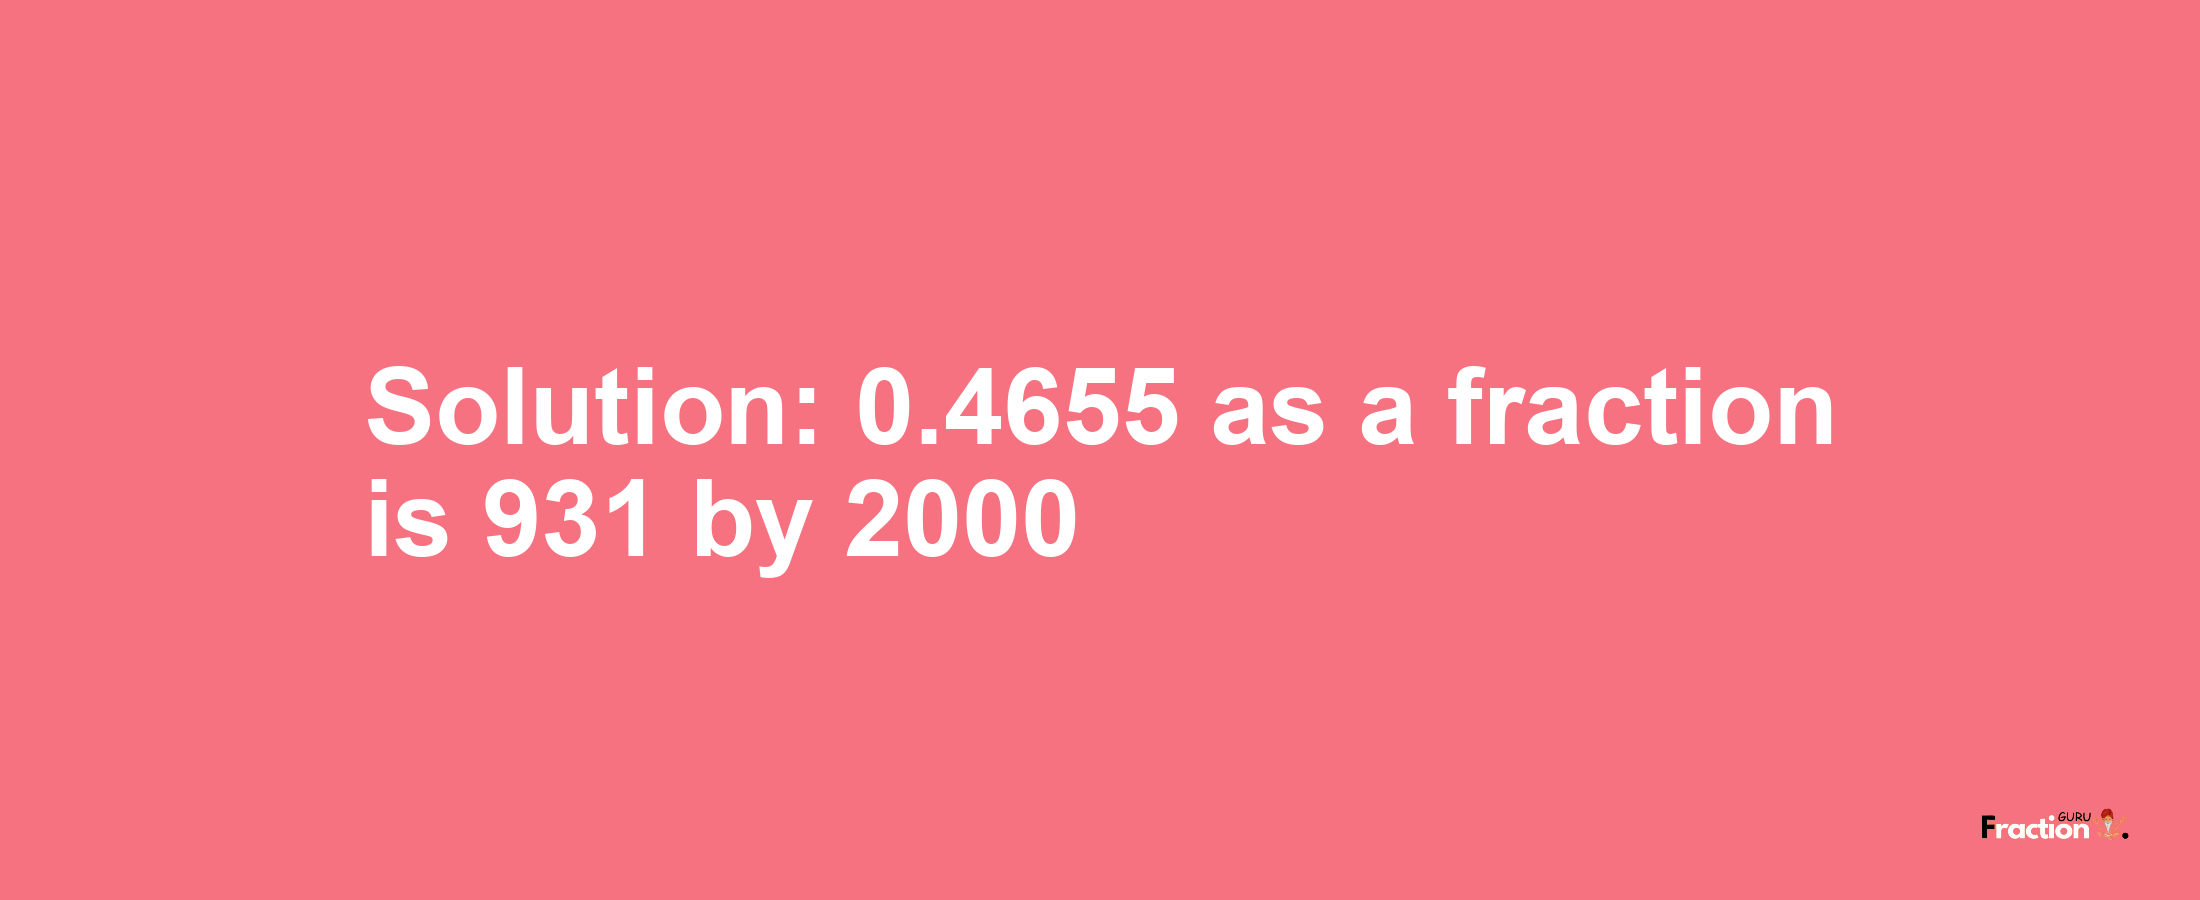 Solution:0.4655 as a fraction is 931/2000